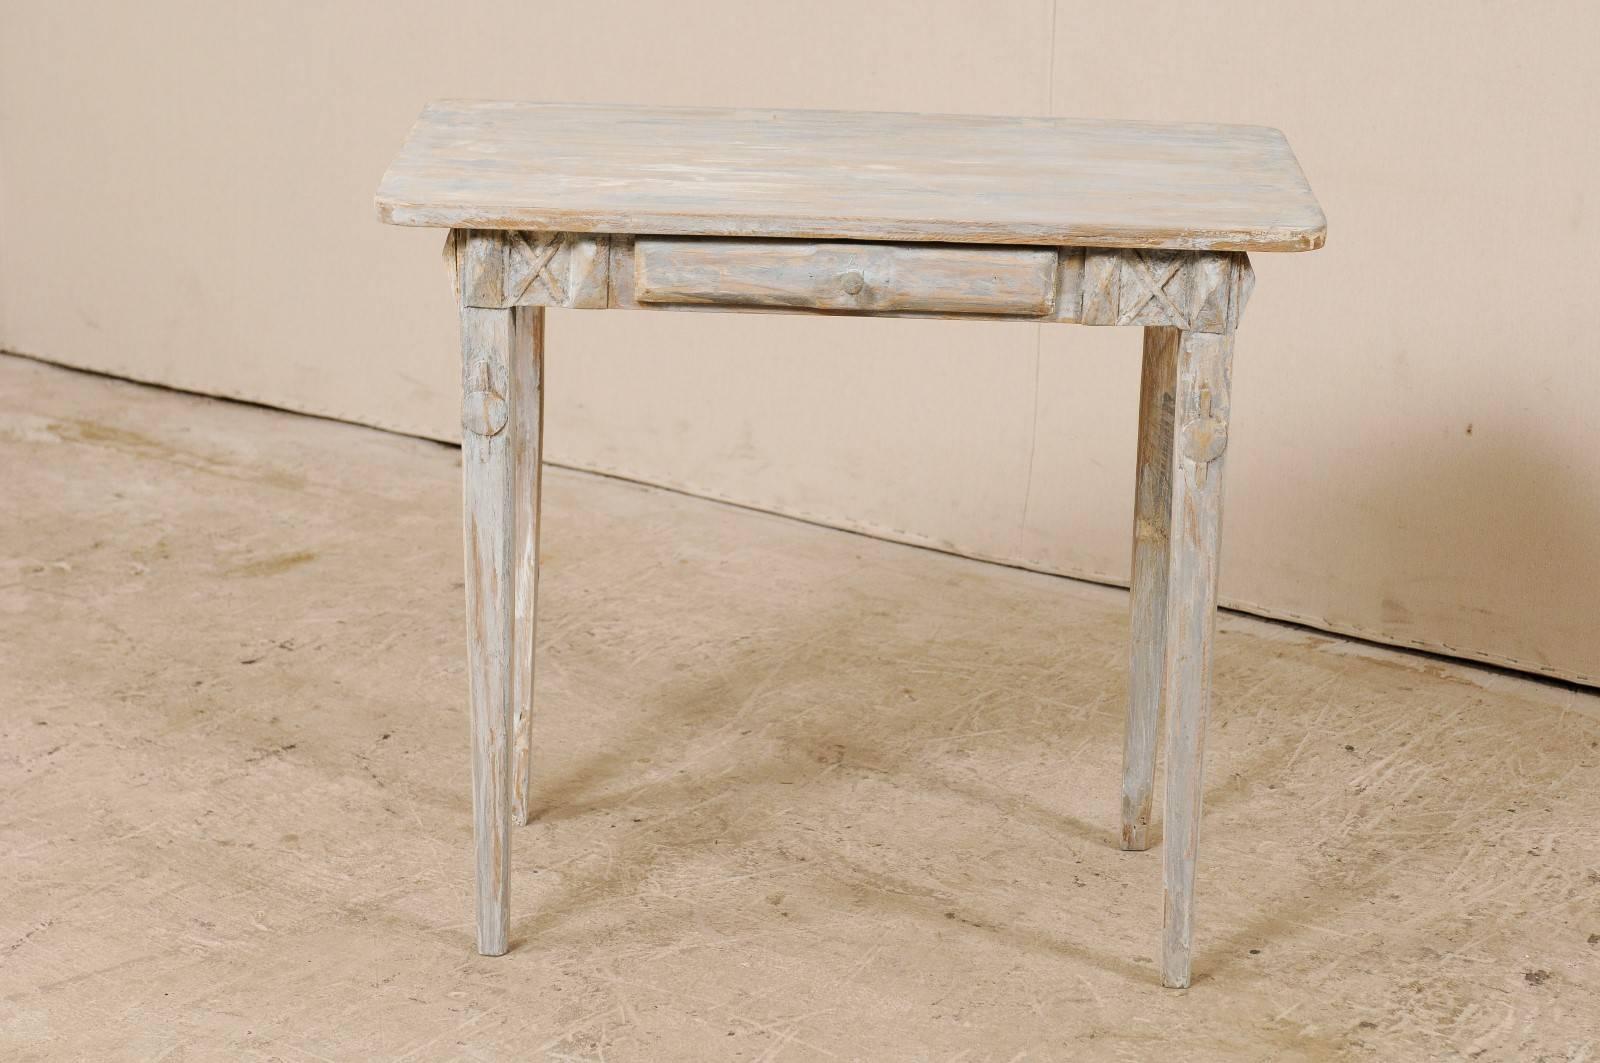 A Swedish period Gustavian, 19th century painted wood side table. This antique Swedish small sized table features nice clean lines, a rectangular-shaped top, and single drawer. The drawer is flanked with x-style carvings and has a carved wood pull